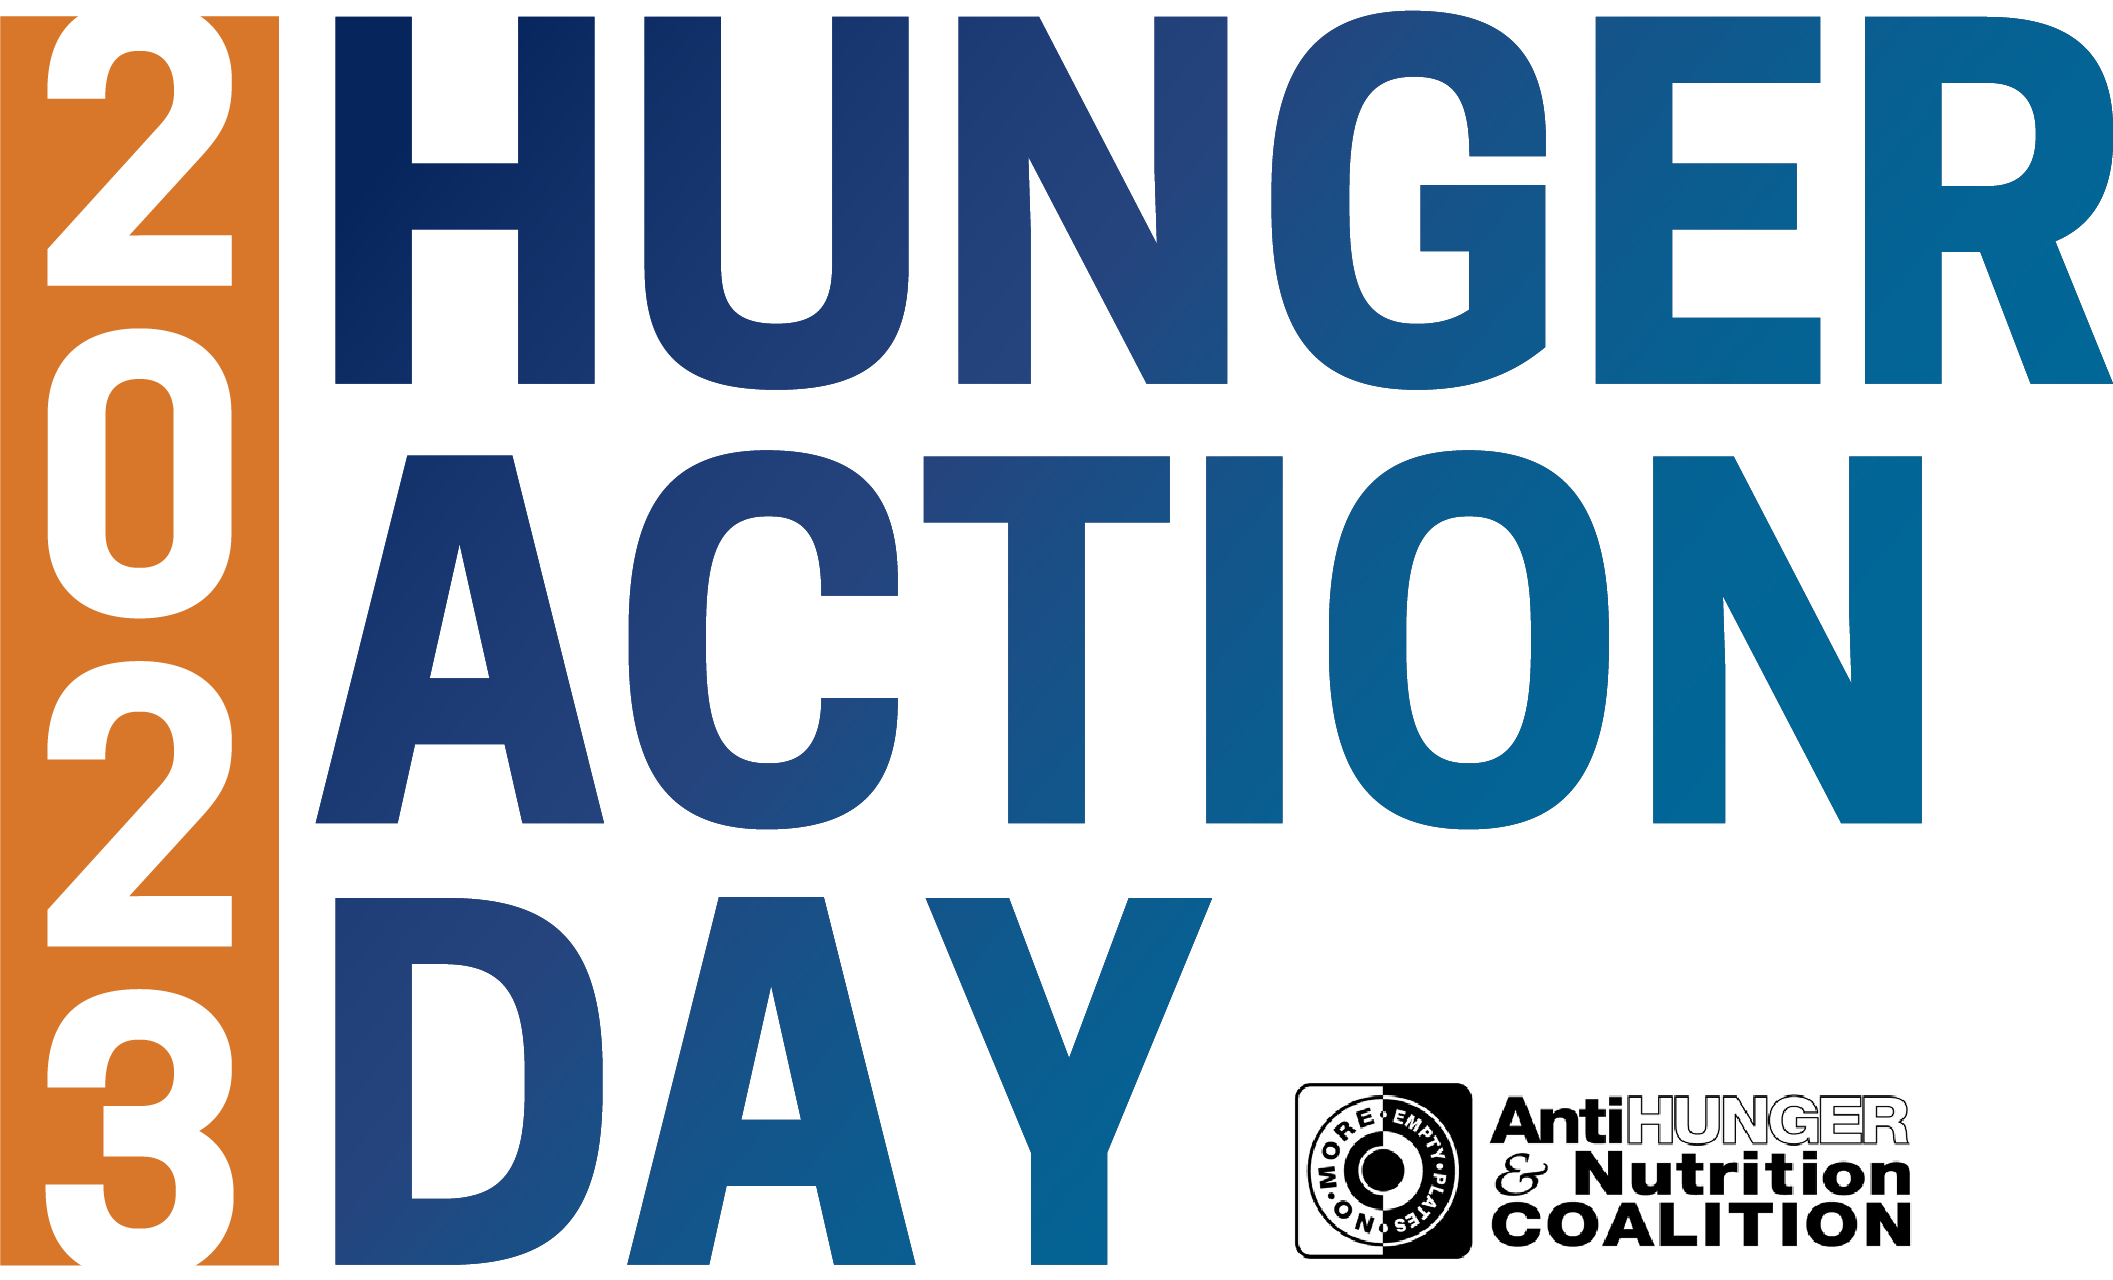 Hunger Action Day 2023 + Anti-Hunger & Nutrition Coalition logo